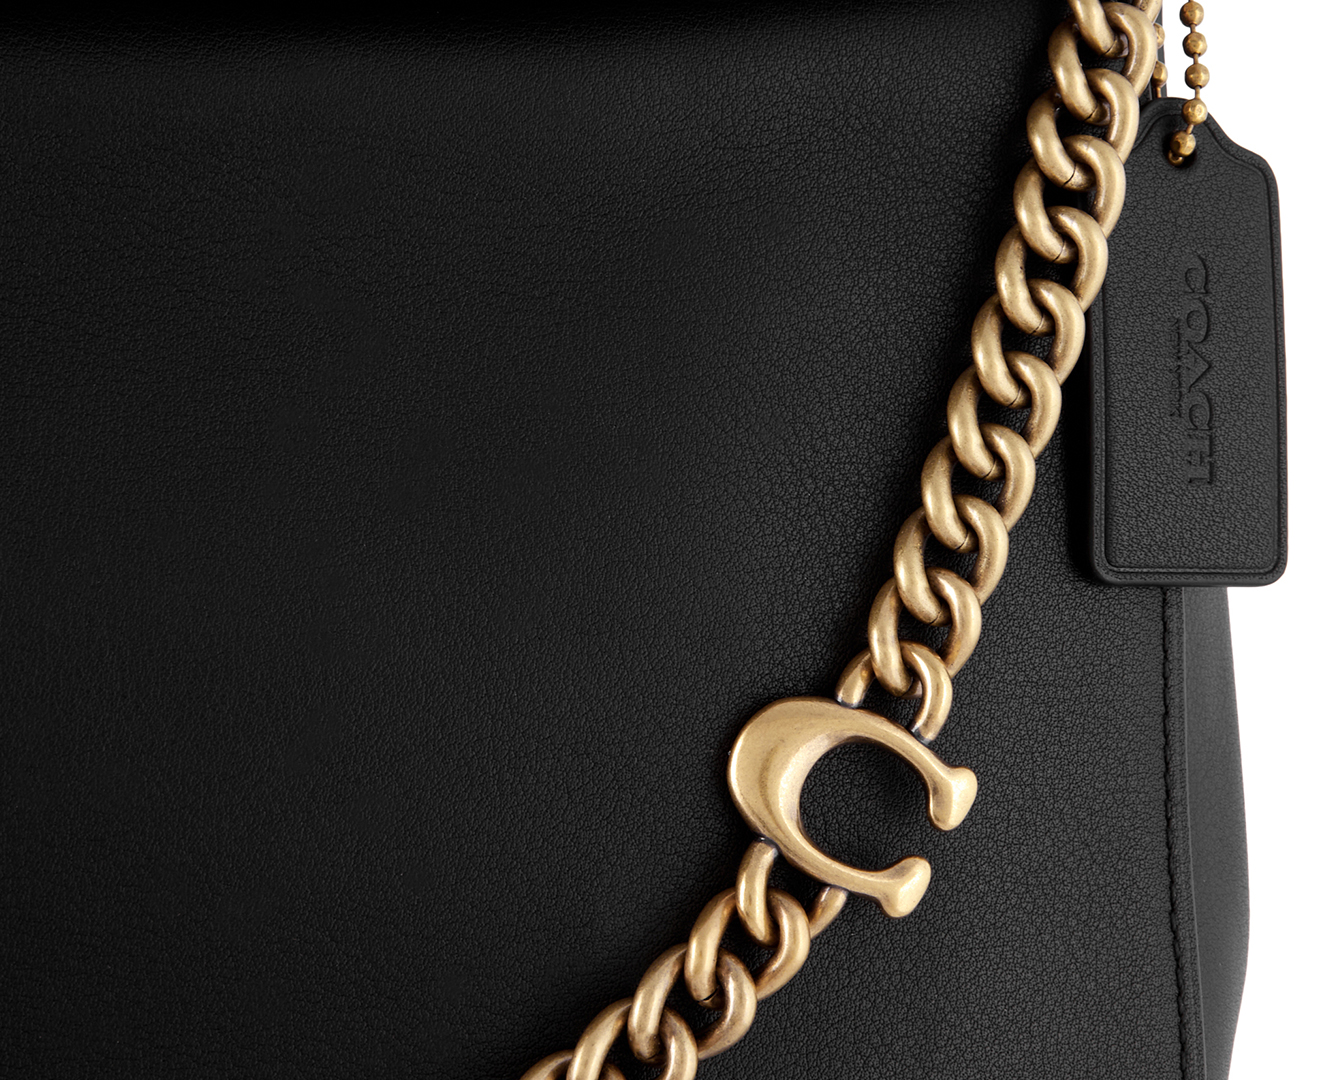 Coach Signature Chain Leather Hobo Bag - Black | Catch.co.nz